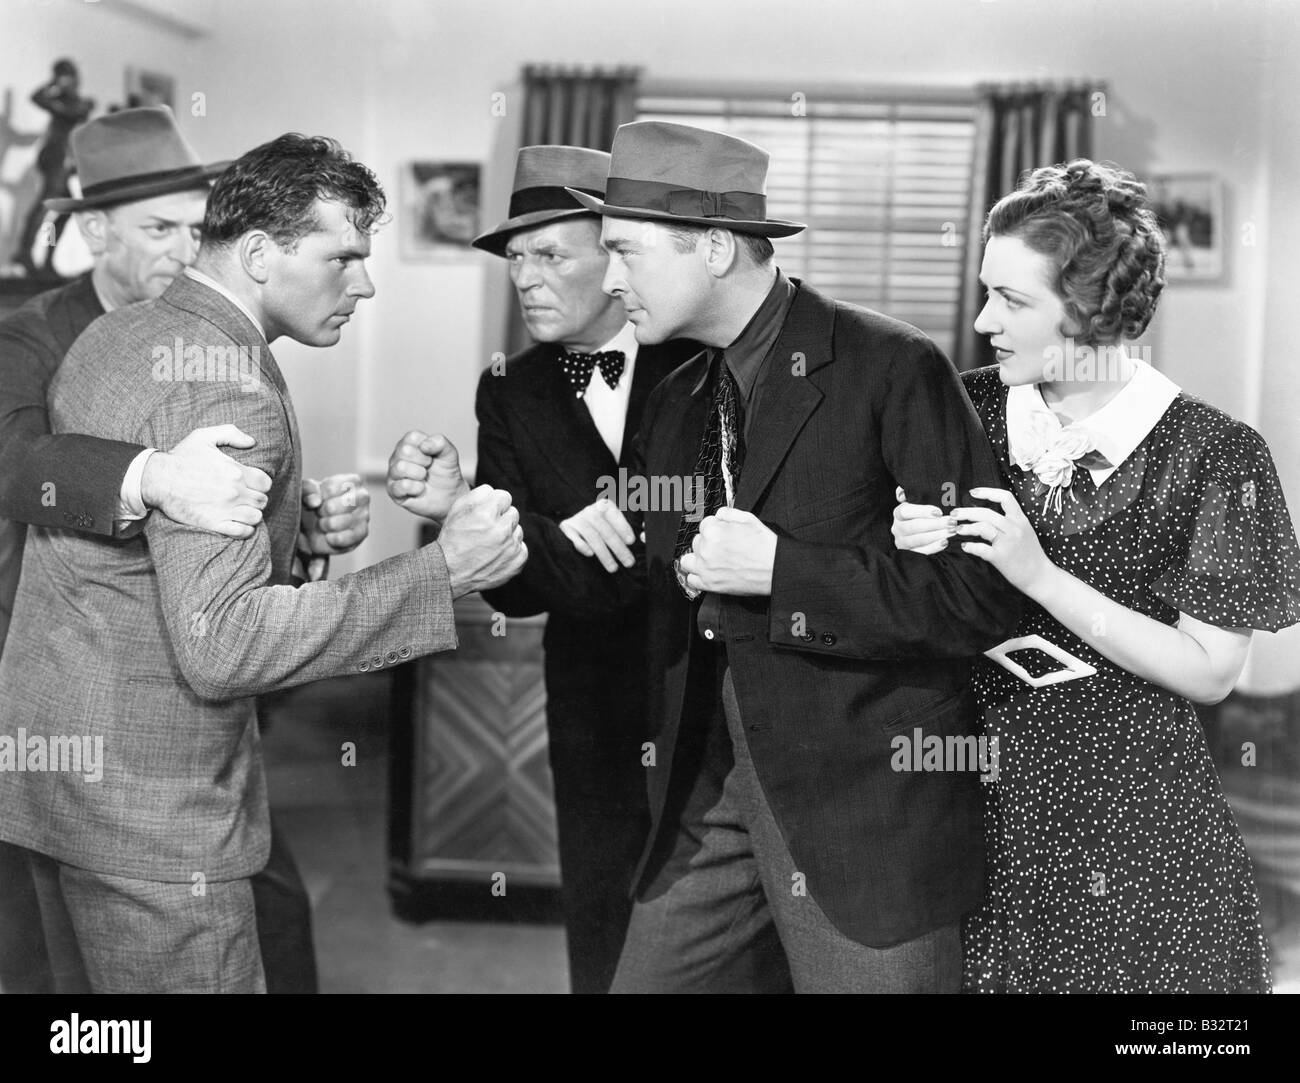 Two men fighting with each other and being held back by a woman and a man Stock Photo